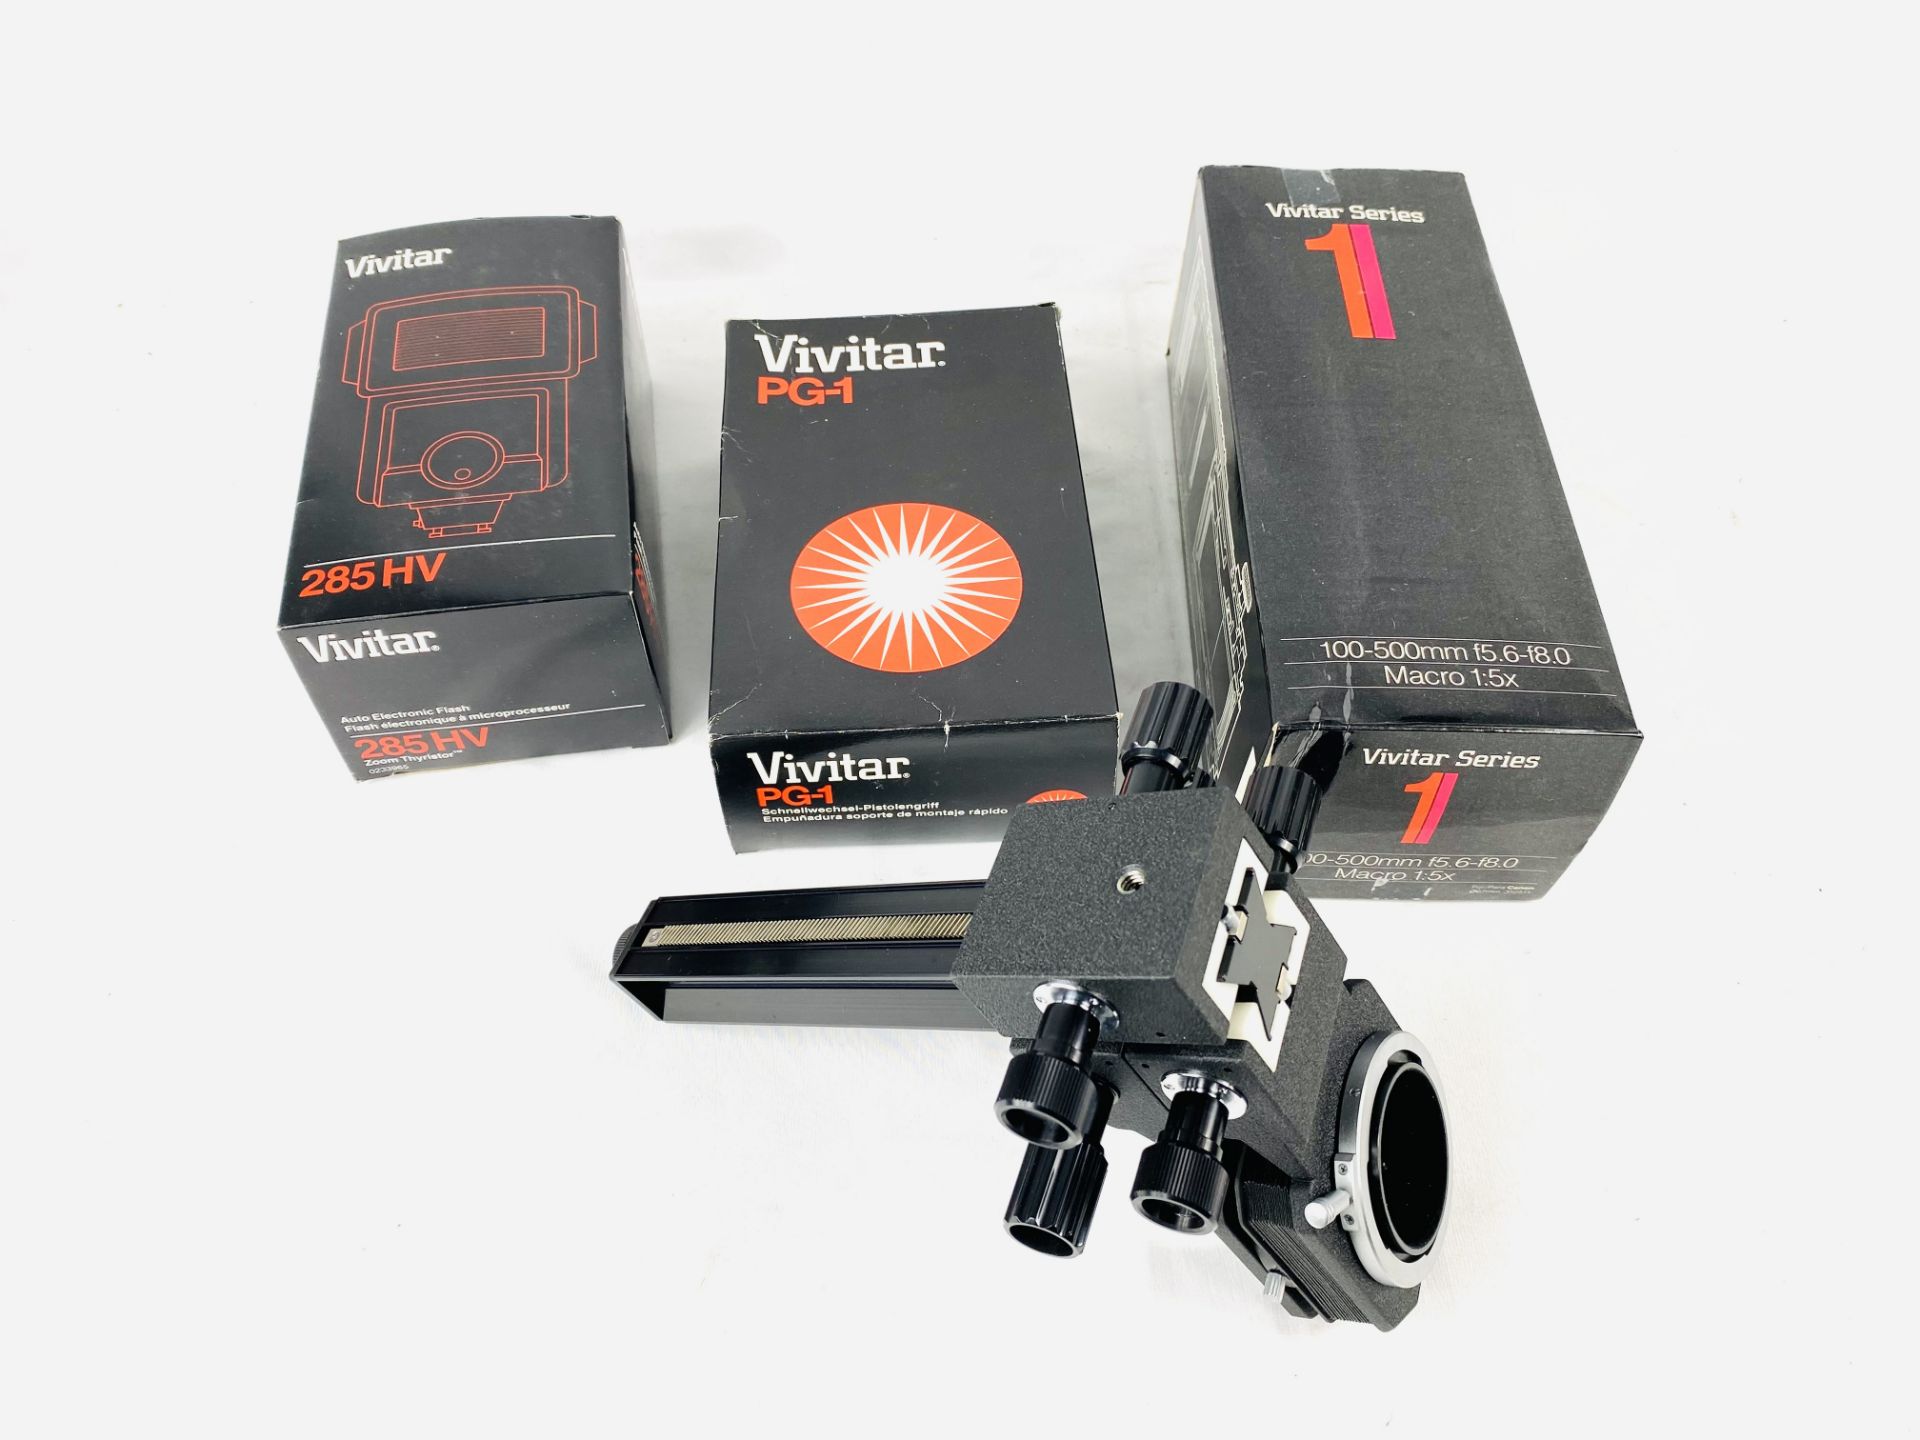 Vivitar macro lens and other camera accessories